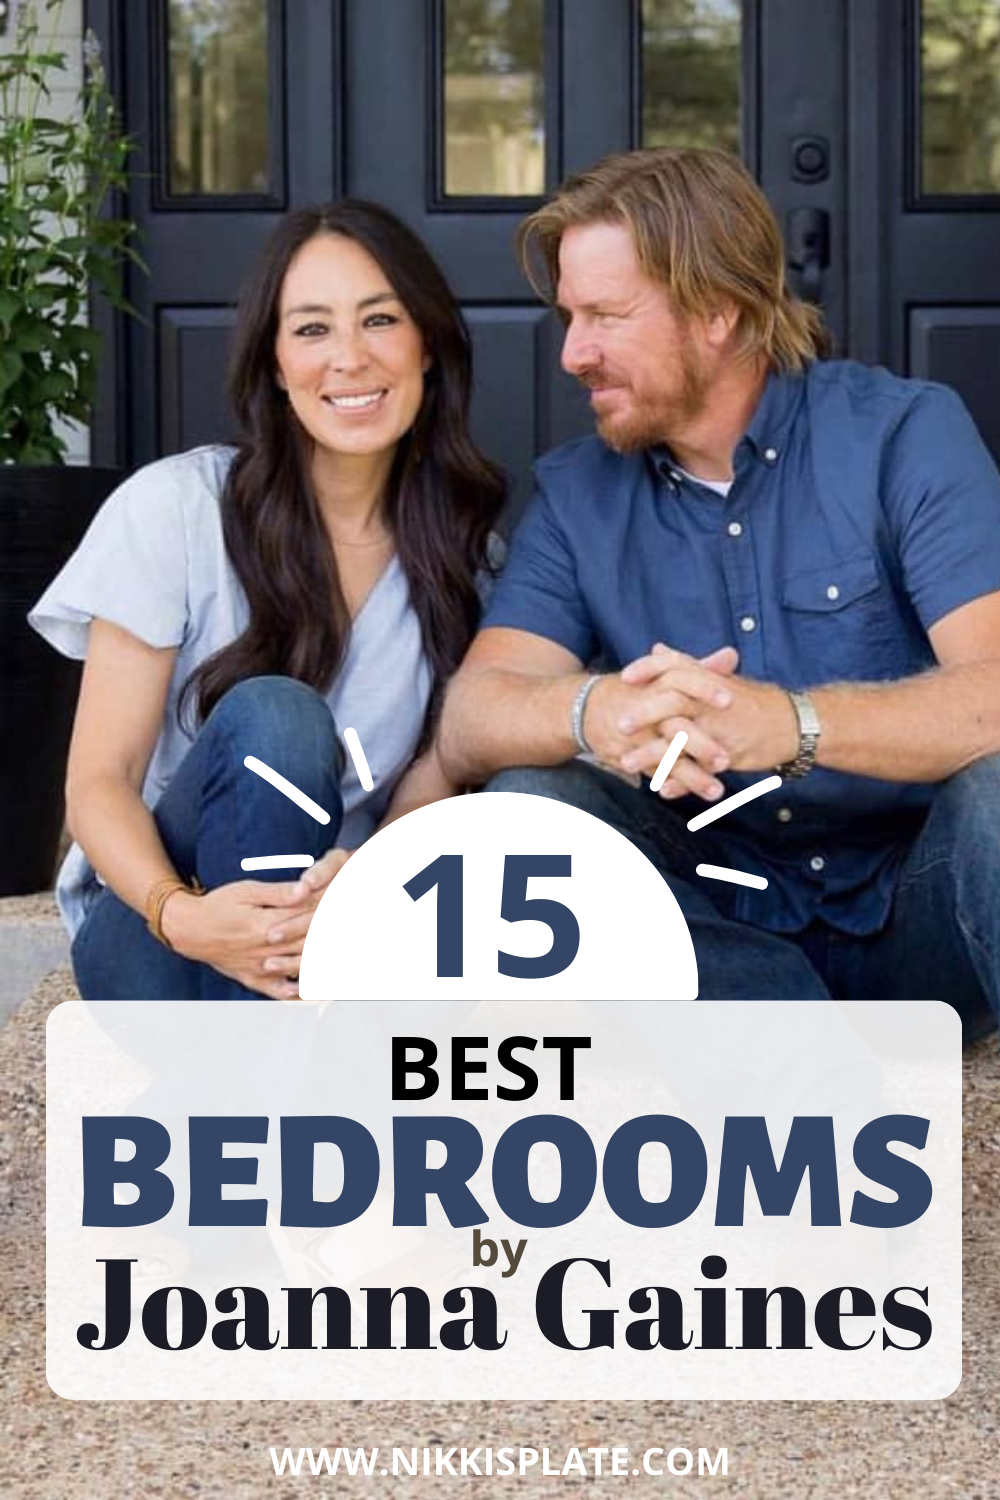 15 Best Bedrooms by Joanna Gaines: Here are the top bedroom designs and renovations done by Joanna Gaines from Fixer Upper! - Nikki's Plate #fixerupper #joannagaines